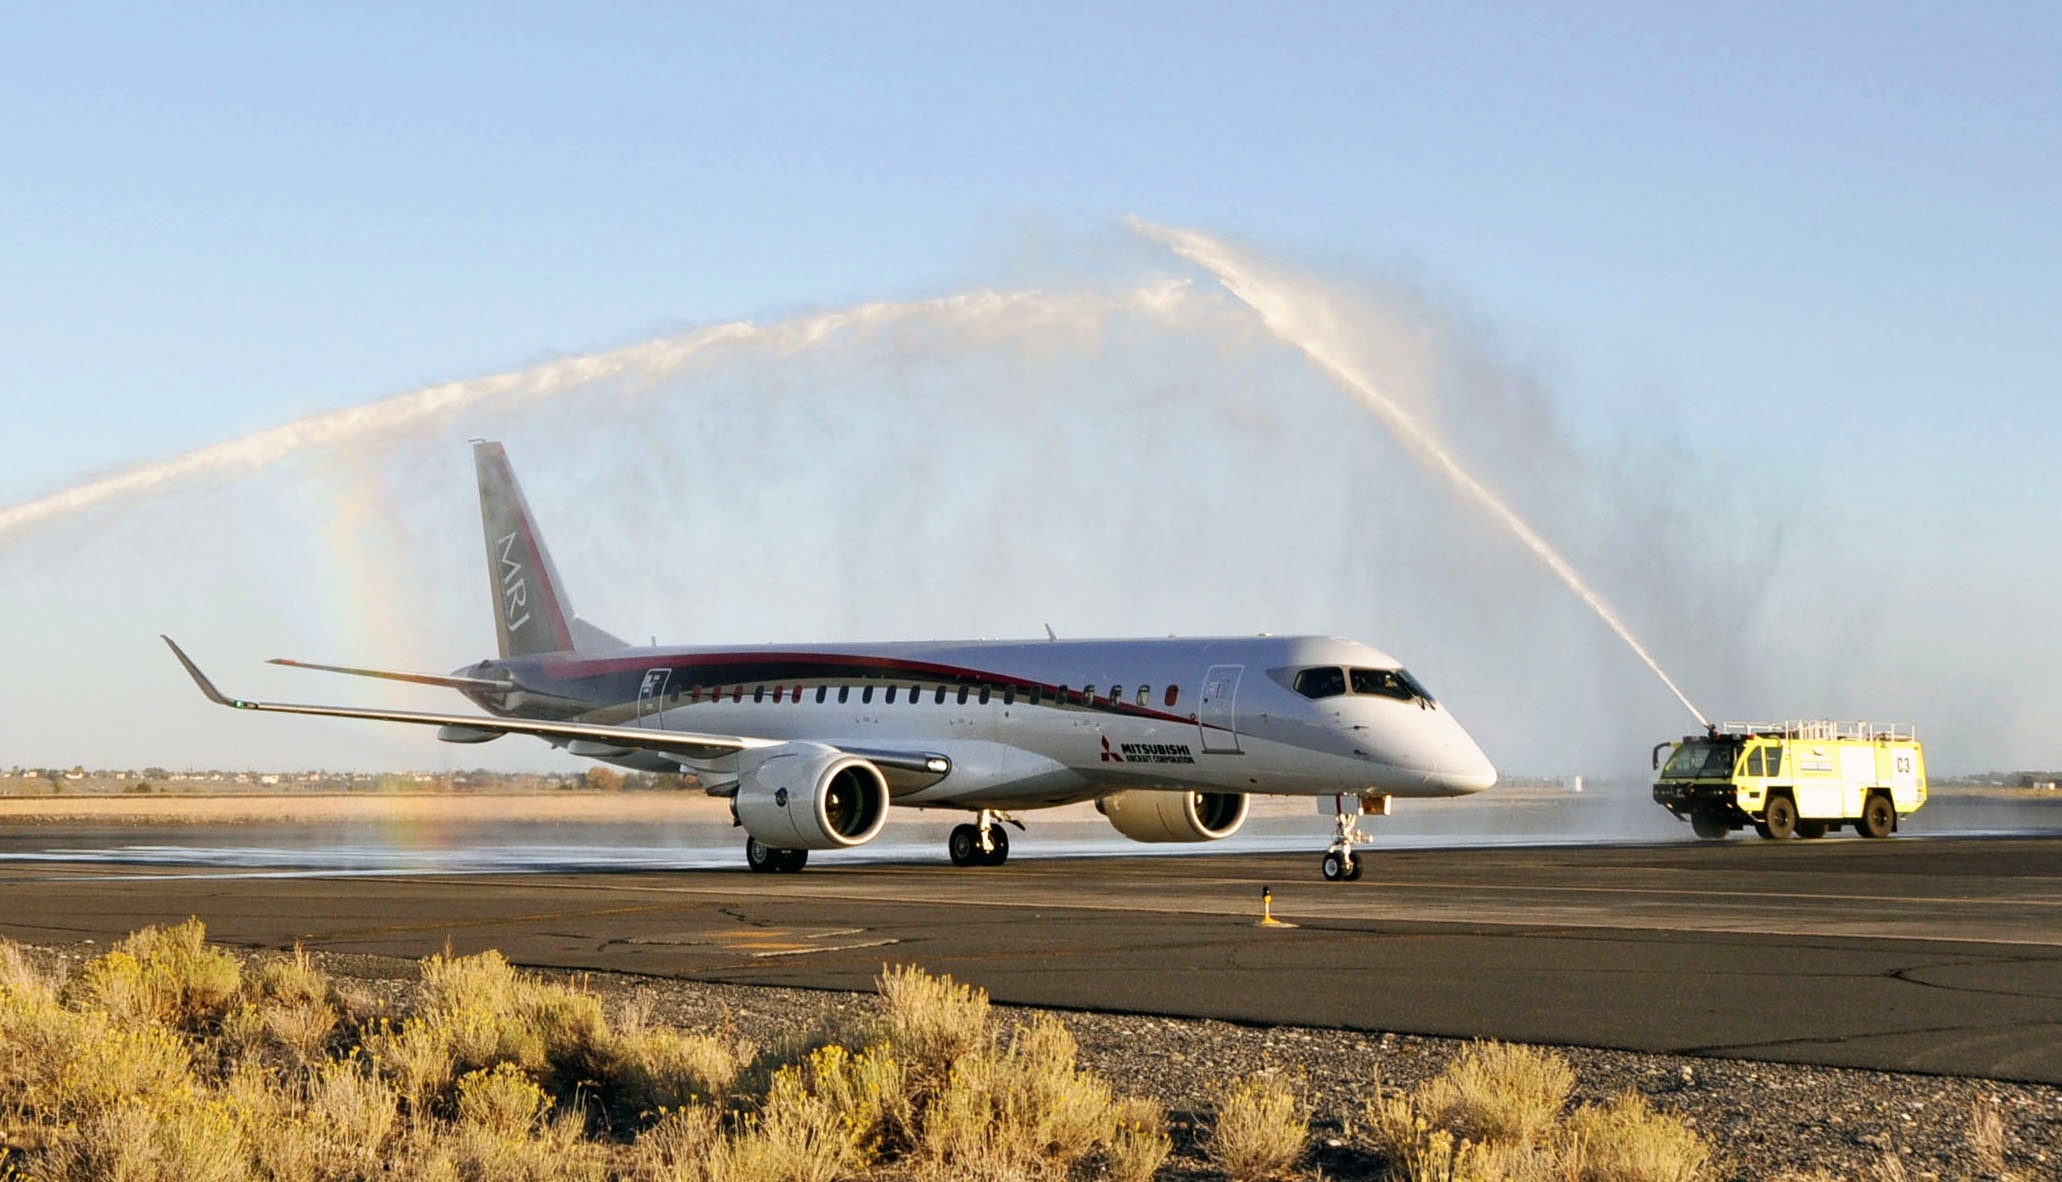 Mitsubishi jet touches down in US for further testing - Nikkei Asia 2070x1190